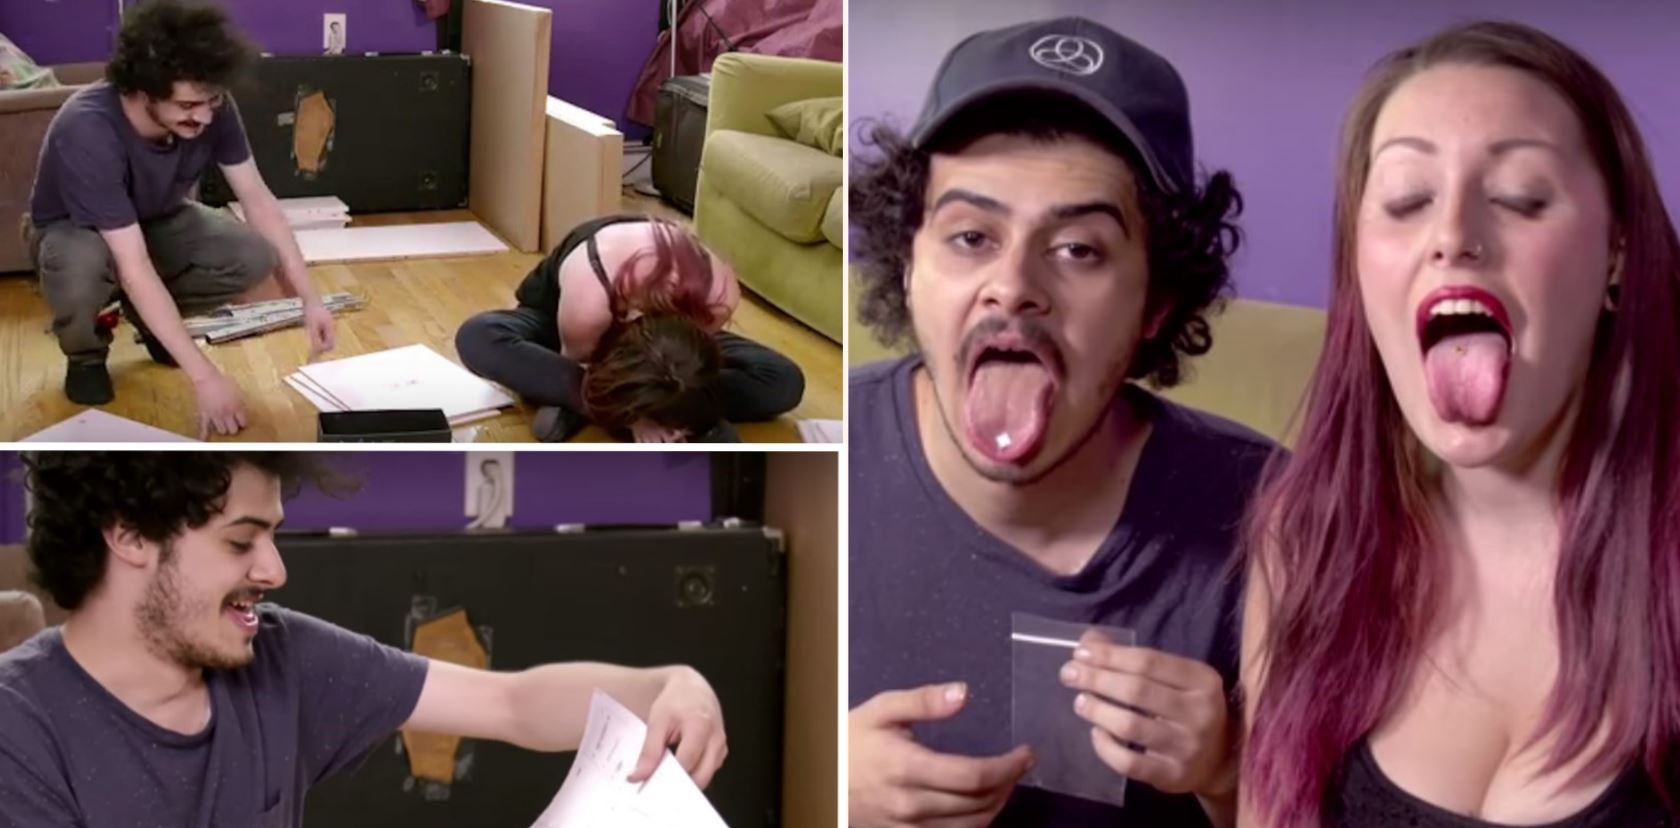 People take LSD and try to assemble IKEA furniture